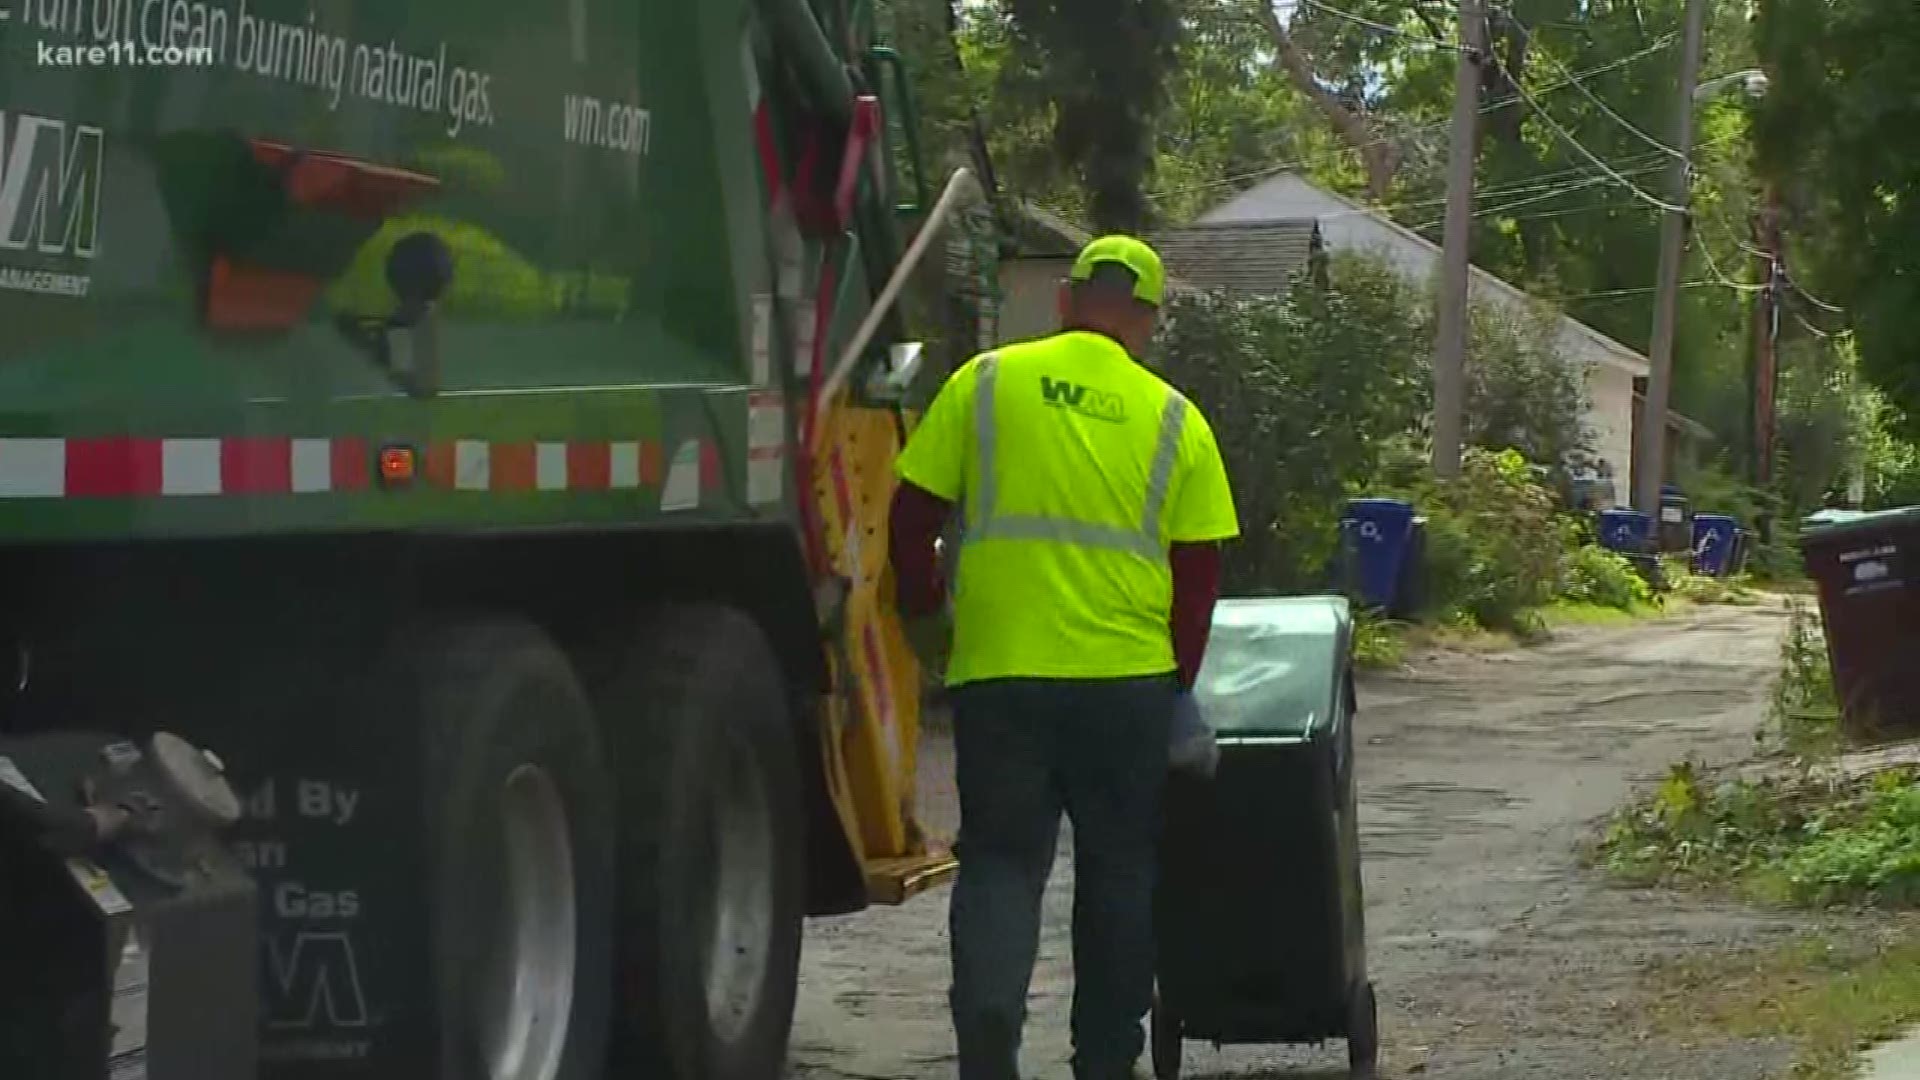 The St. Paul Mayor and City Council discuss the fight over how to handle citywide garbage collection.